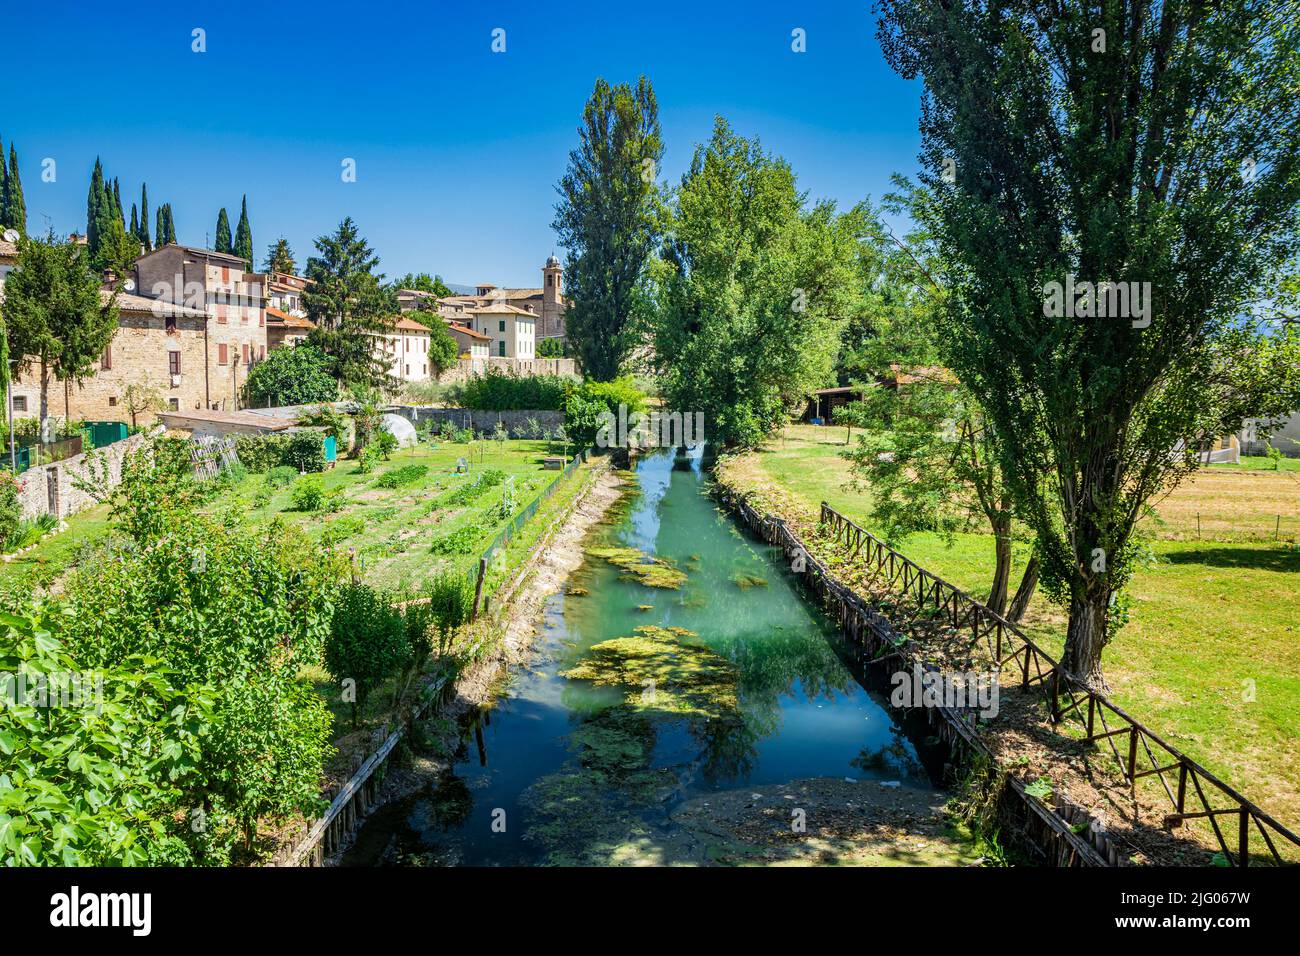 The Chiasco river that crosses the ancient medieval village of Bevagna. Perugia, Umbria, Italy. Trees, vegetation, cultivated gardens. Green algae on Stock Photo